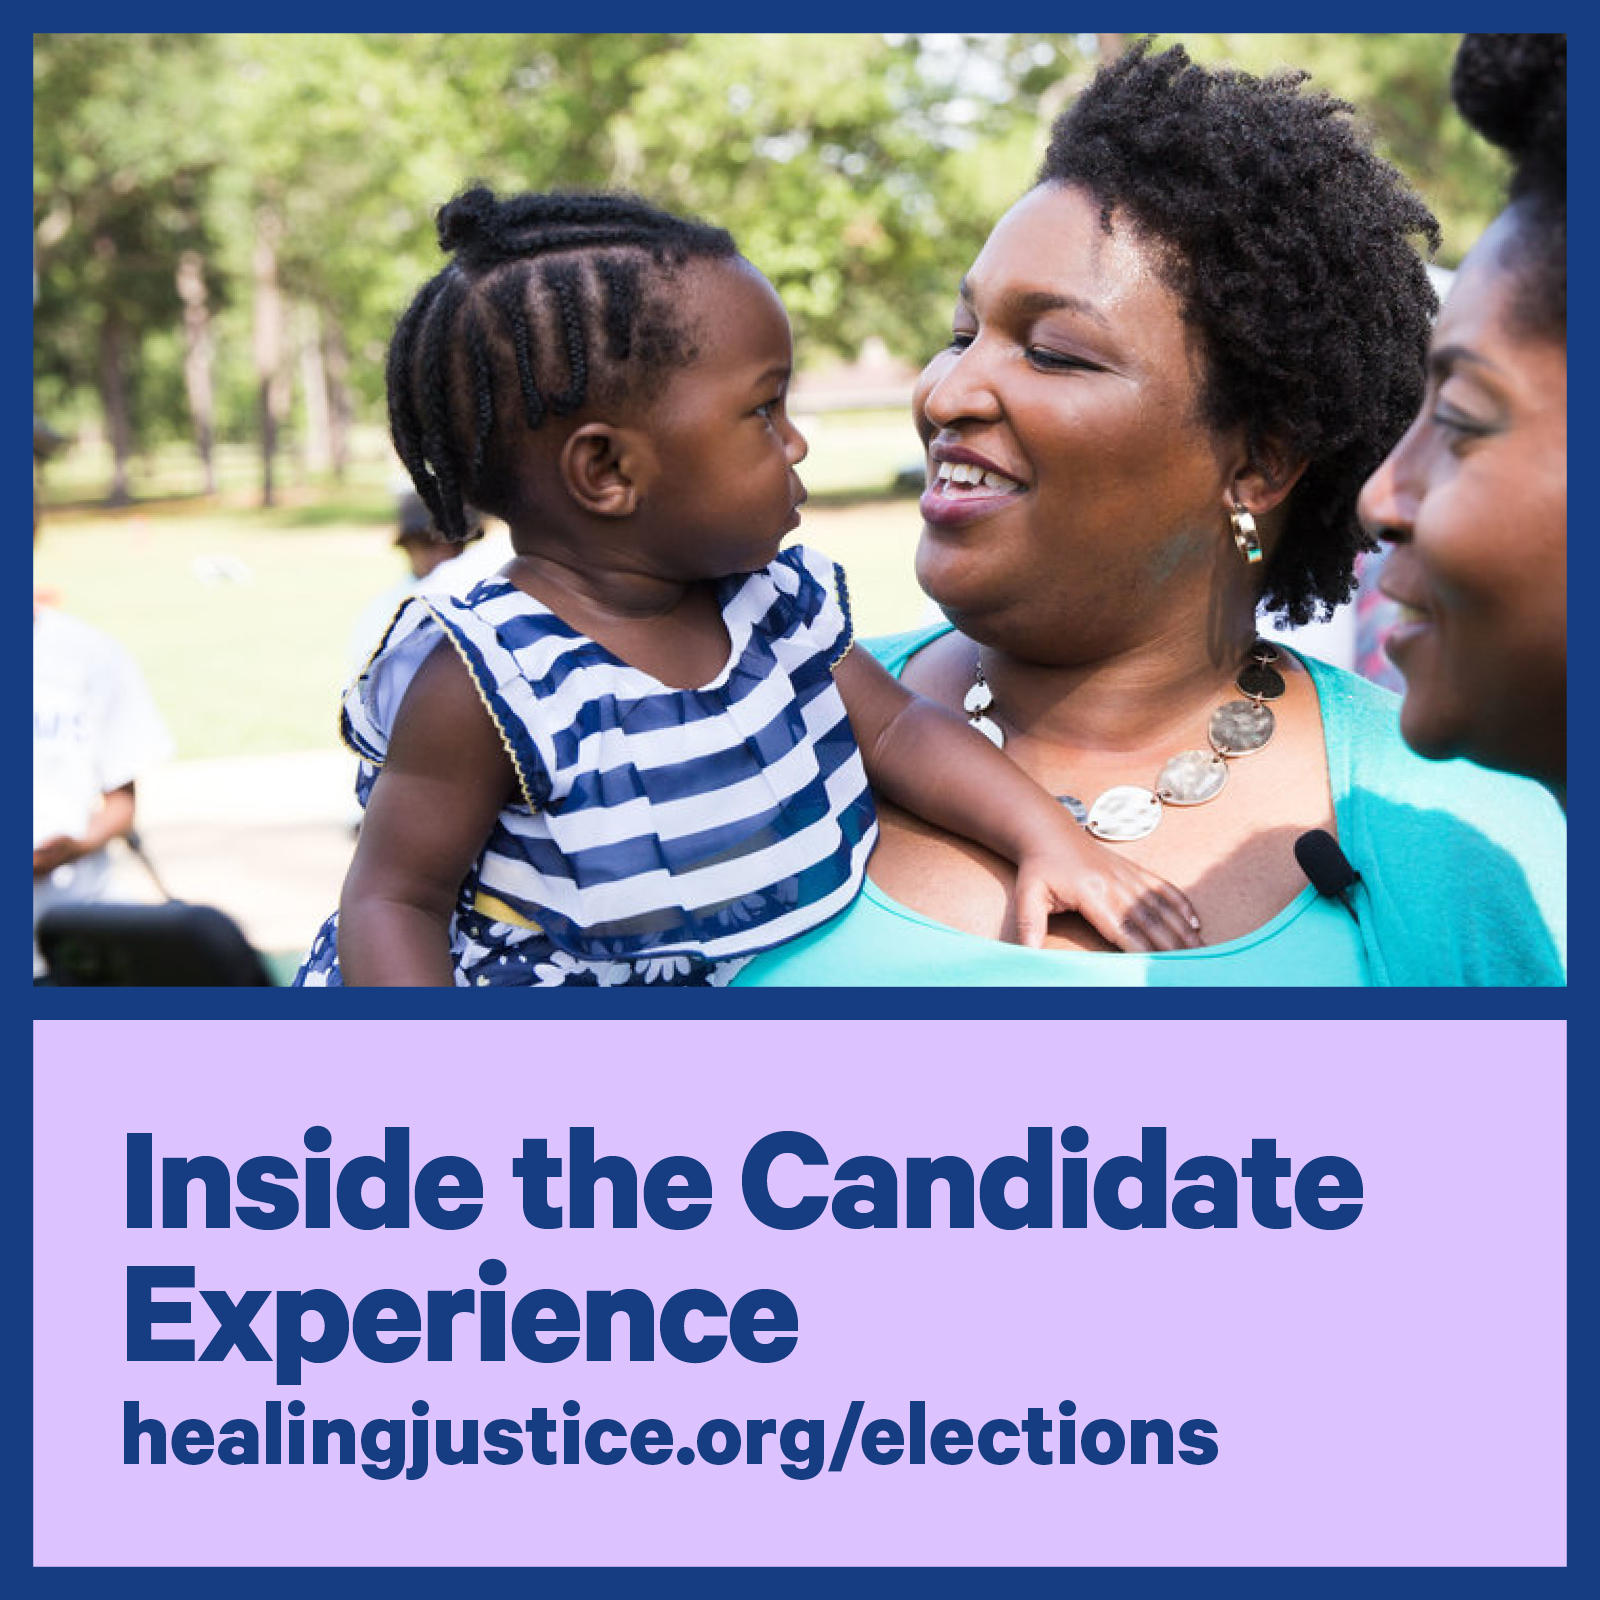 Inside the Candidate Experience with Stacey Abrams, Ashlee Marie Preston, & Nelini Stamp